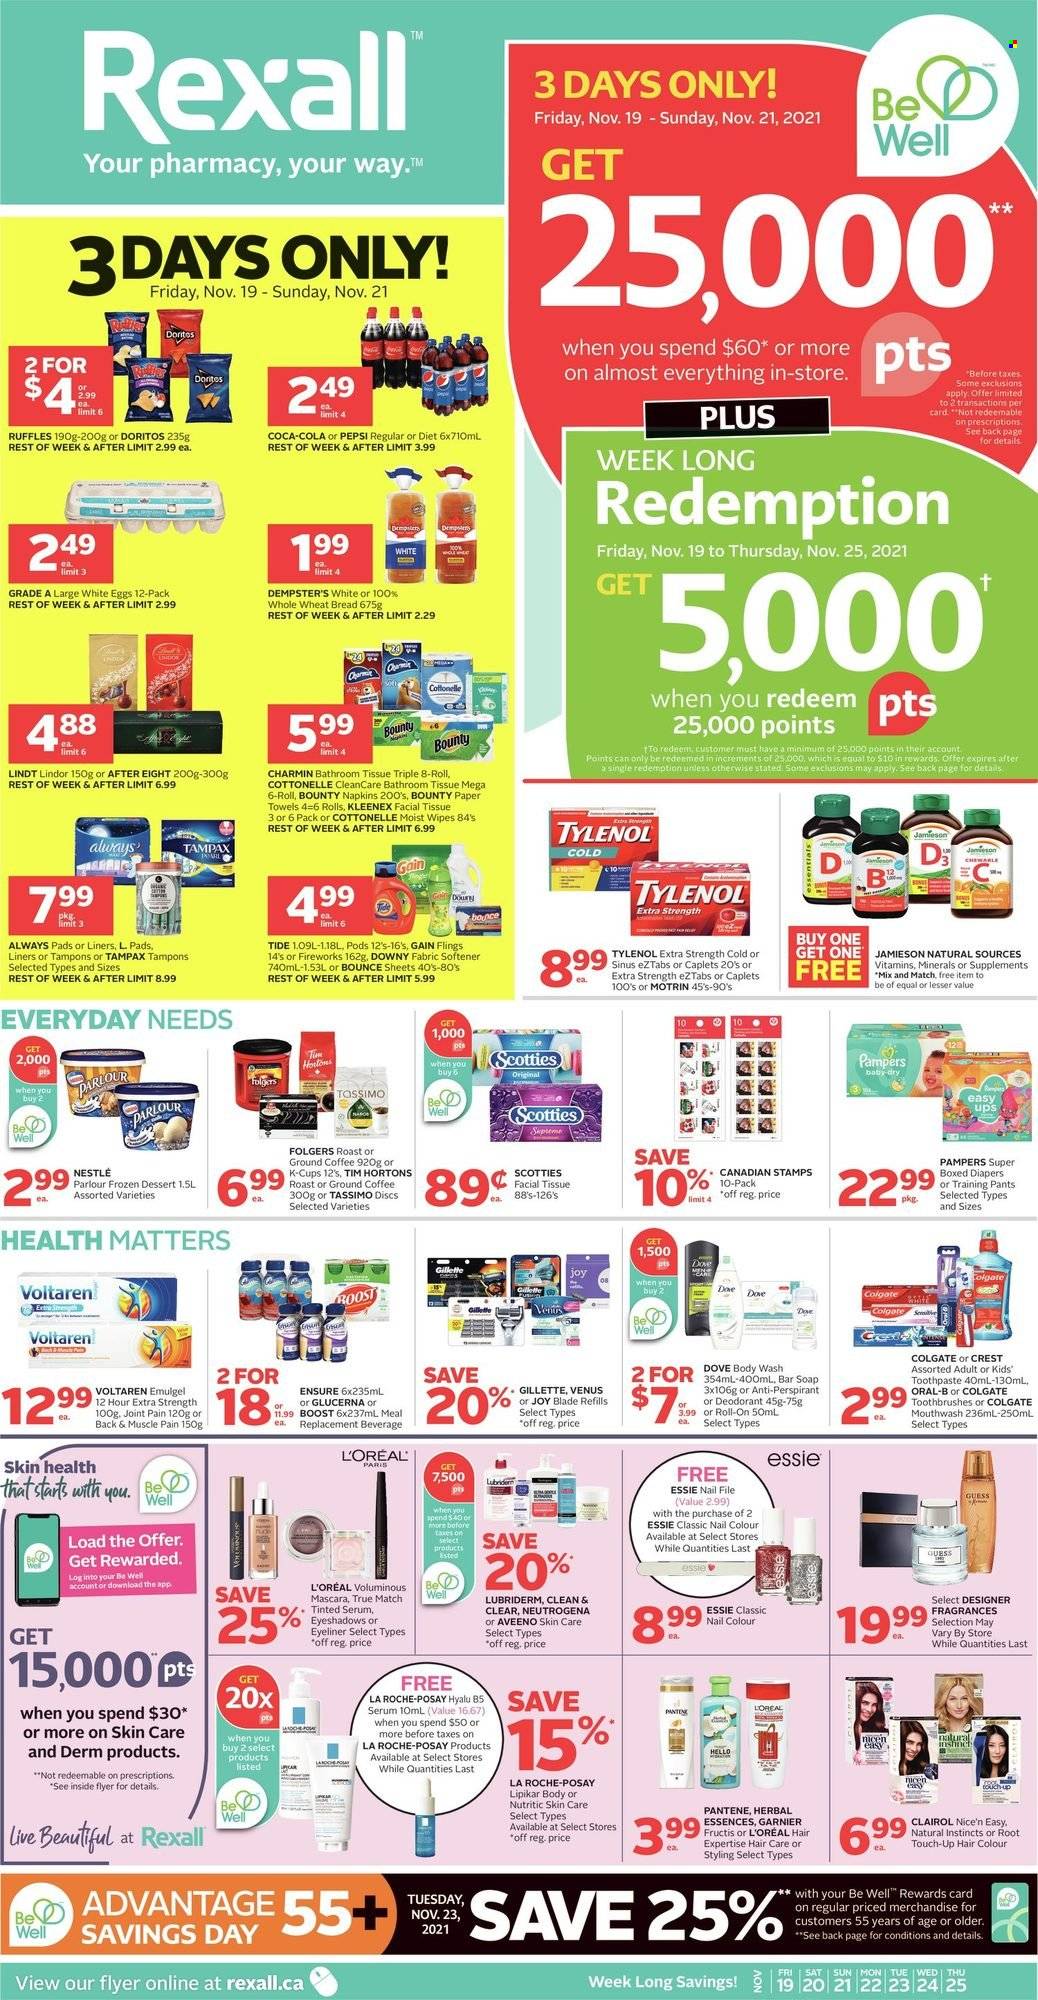 thumbnail - Rexall Flyer - November 19, 2021 - November 25, 2021 - Sales products - Bounty, After Eight, Doritos, Ruffles, Coca-Cola, Pepsi, Boost, coffee, Folgers, ground coffee, coffee capsules, K-Cups, wipes, pants, nappies, napkins, baby pants, Aveeno, bath tissue, Cottonelle, Kleenex, kitchen towels, paper towels, Charmin, Gain, Tide, fabric softener, Bounce, Downy Laundry, Joy, body wash, soap bar, soap, toothpaste, mouthwash, Crest, Always pads, sanitary pads, tampons, L’Oréal, La Roche-Posay, serum, Clean & Clear, Root Touch-Up, Clairol, hair color, Herbal Essences, Fructis, Lubriderm, anti-perspirant, roll-on, Guess, Venus, eyeshadow, mascara, eyeliner, Tylenol, Glucerna, Motrin, Nestlé, Dove, Colgate, Garnier, Gillette, Neutrogena, Tampax, Pampers, Pantene, Oral-B, Lindt, Lindor, deodorant. Page 1.